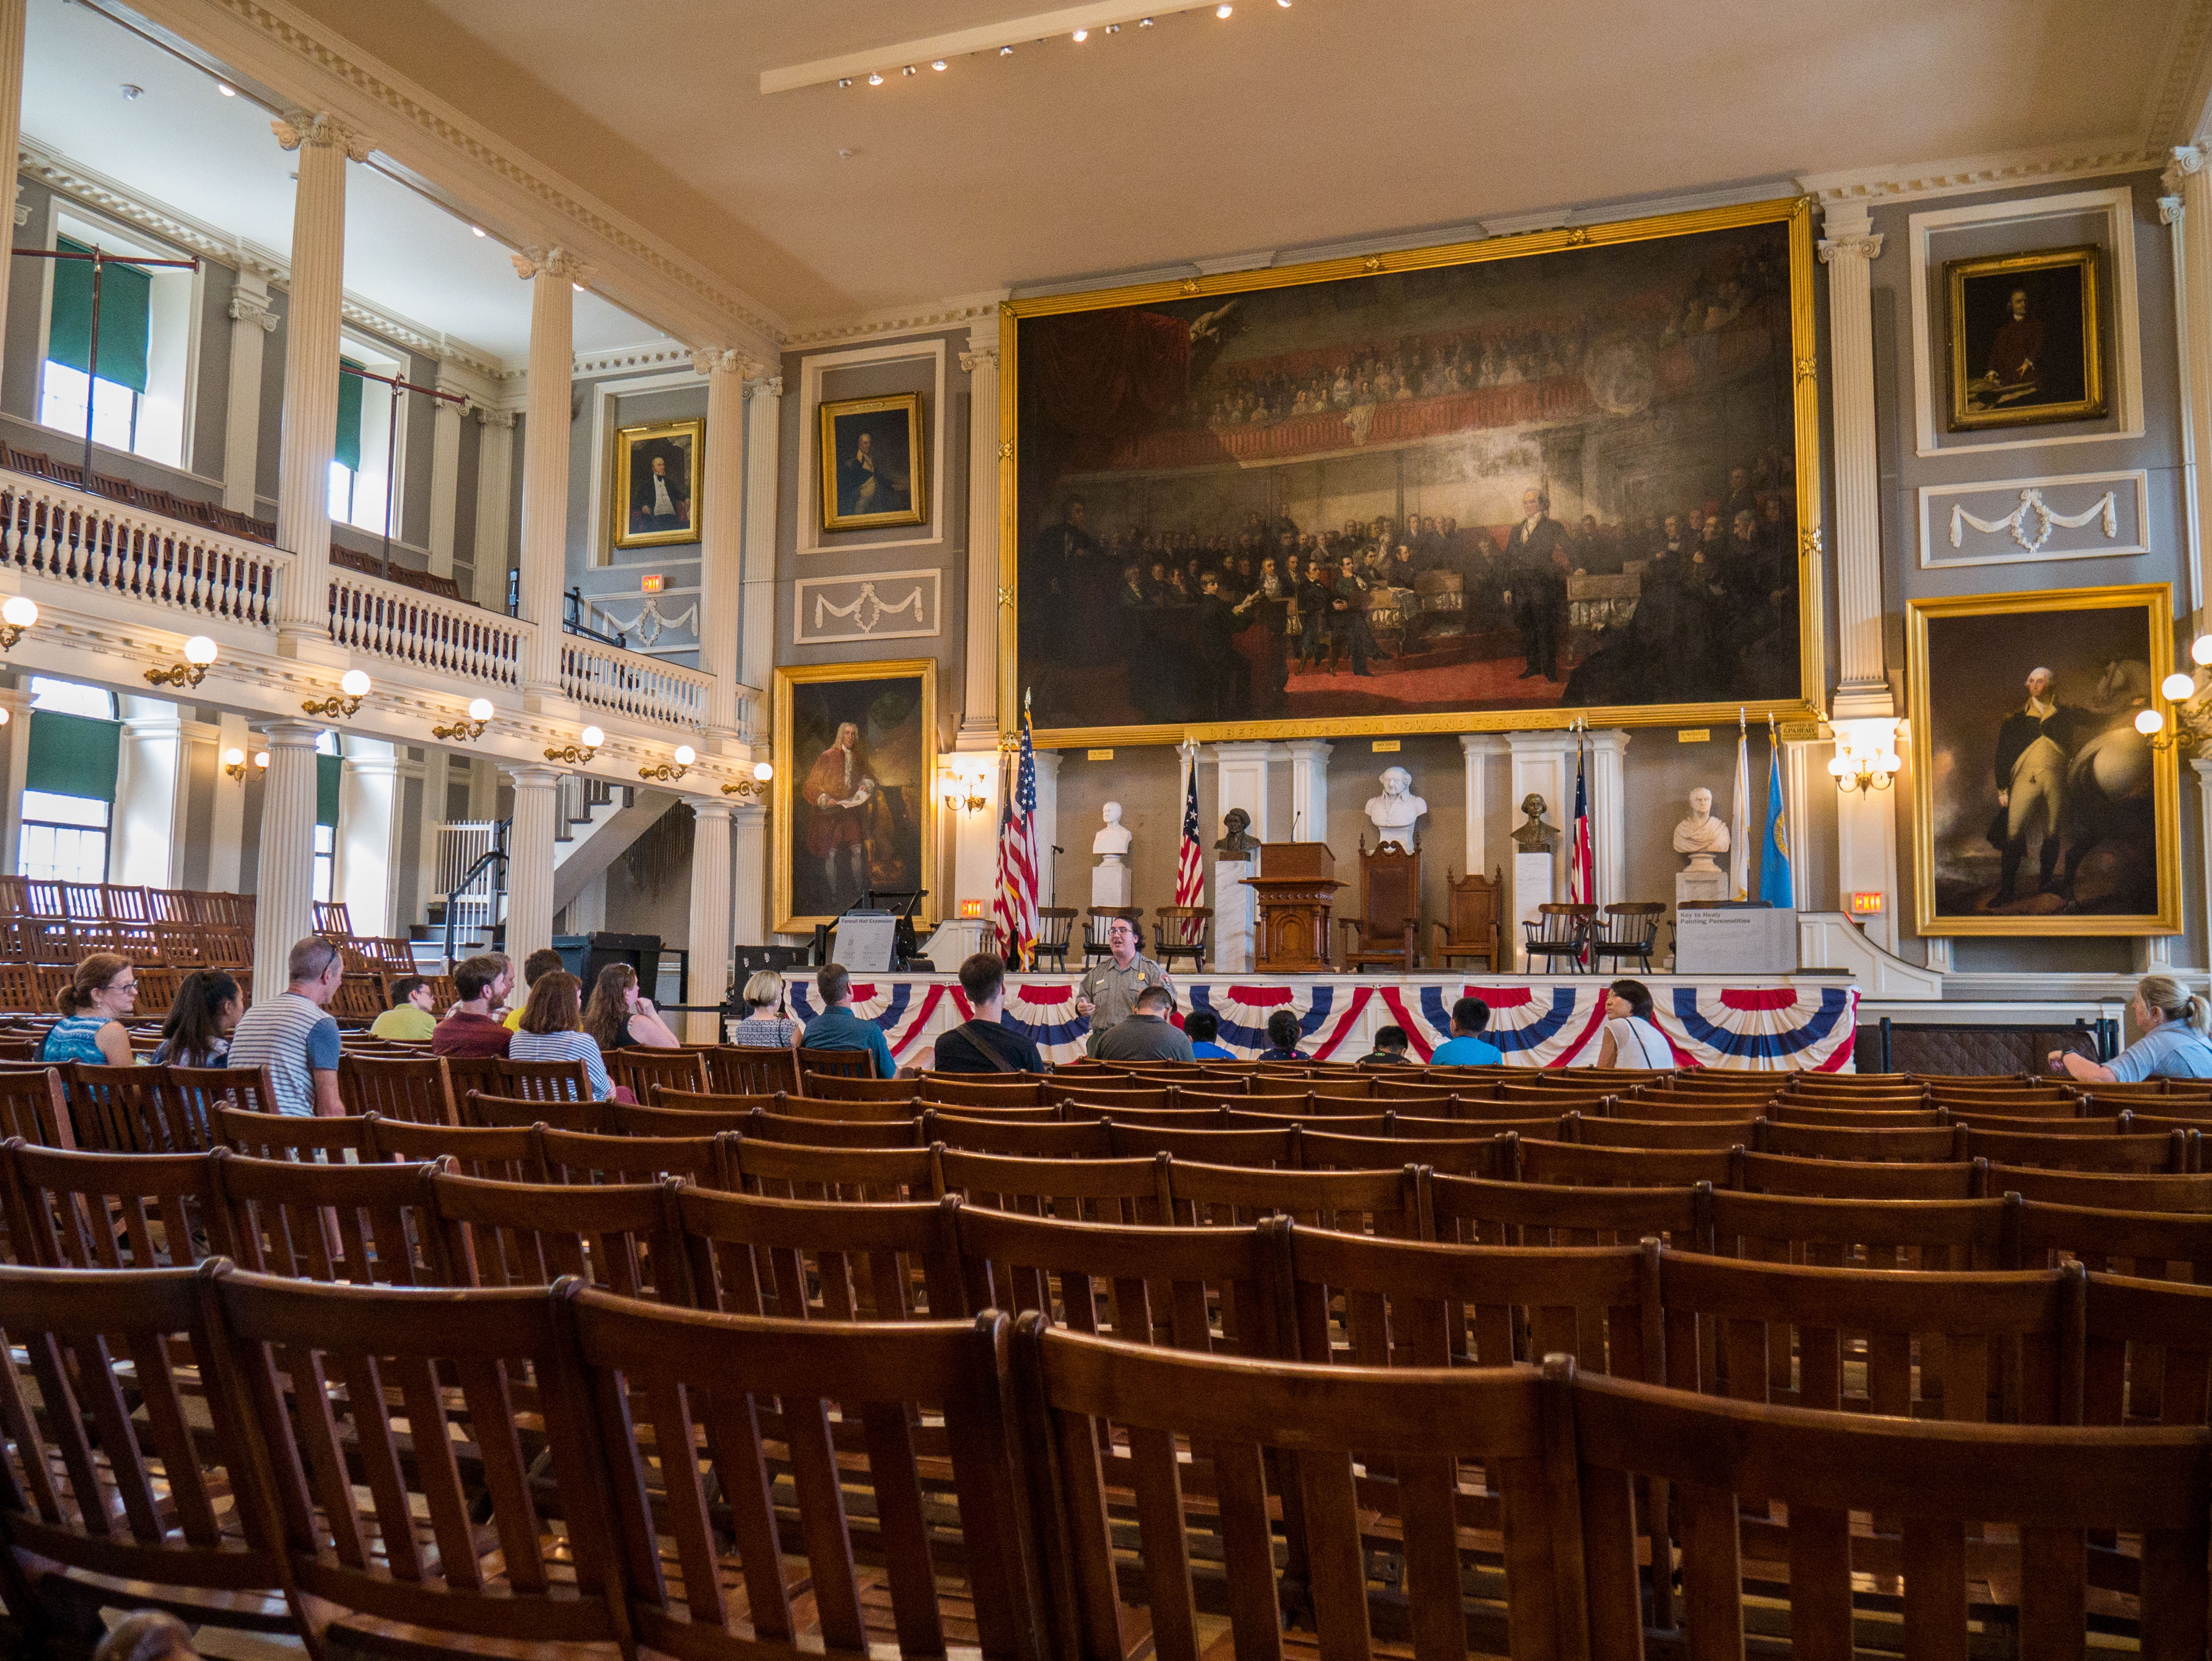 The upper level of Faneuil Hall